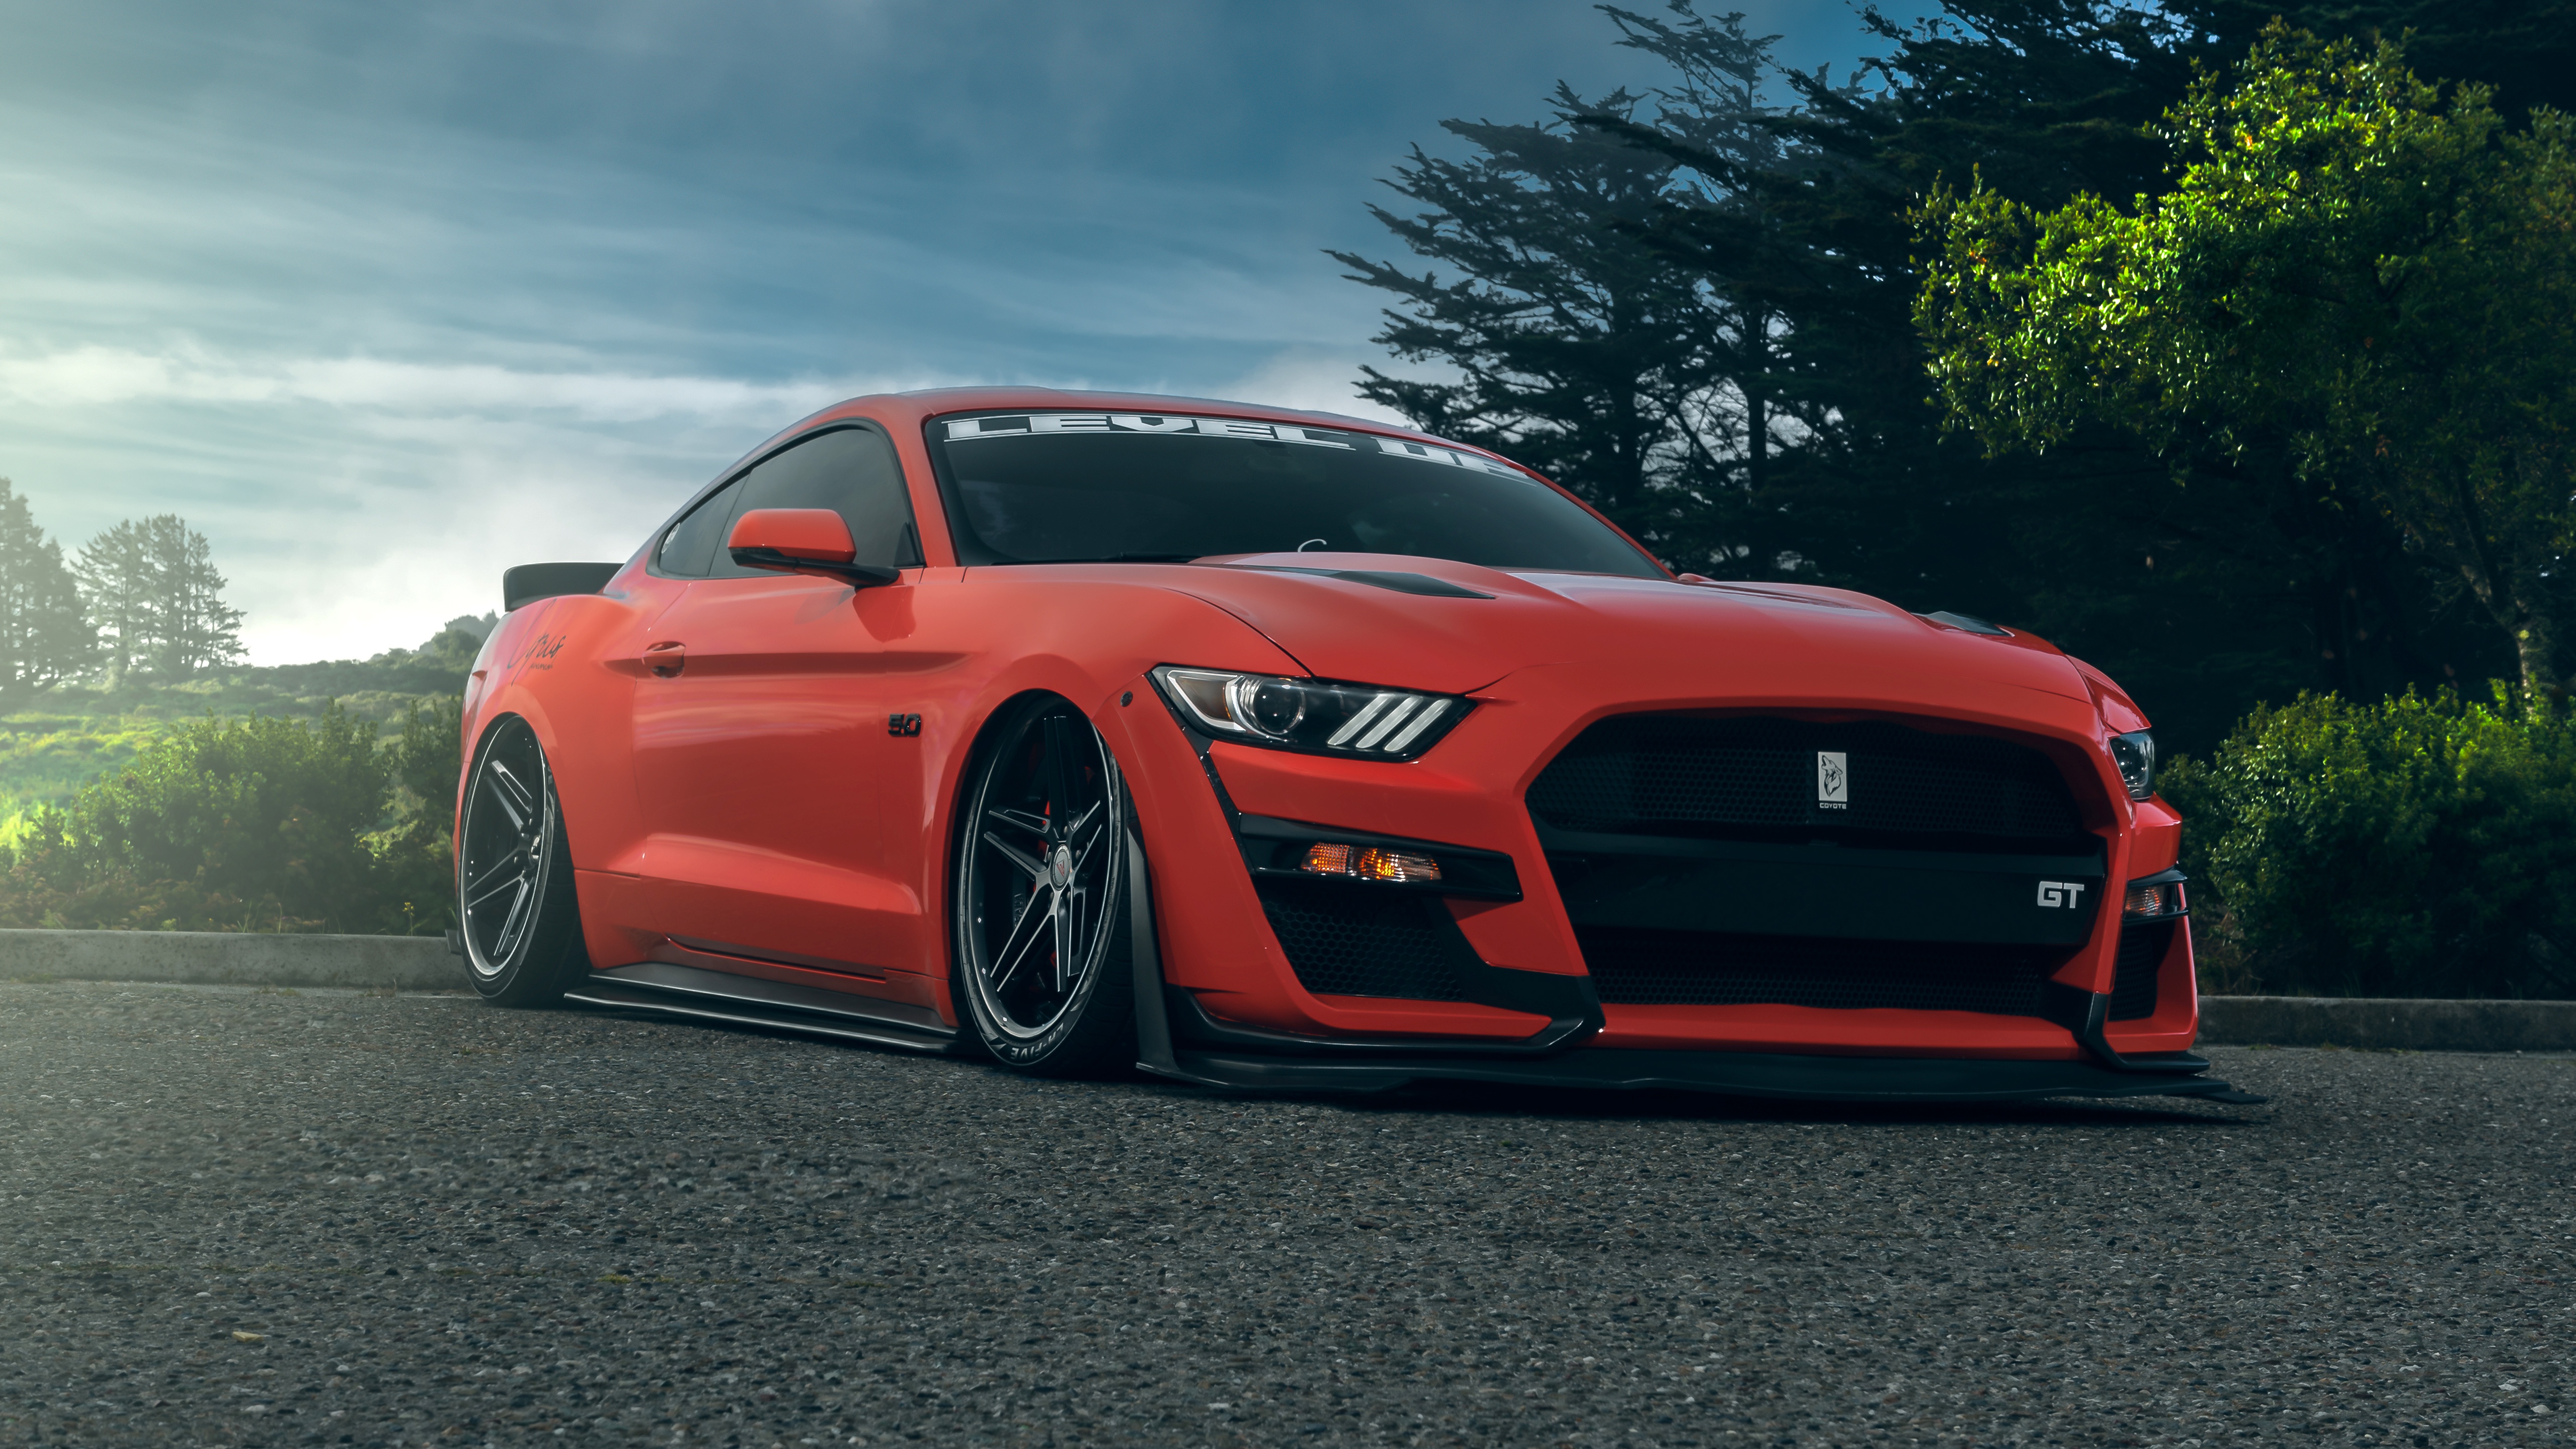 368424 Ford Mustang Gt 2019 4k - Rare Gallery HD Wallpapers